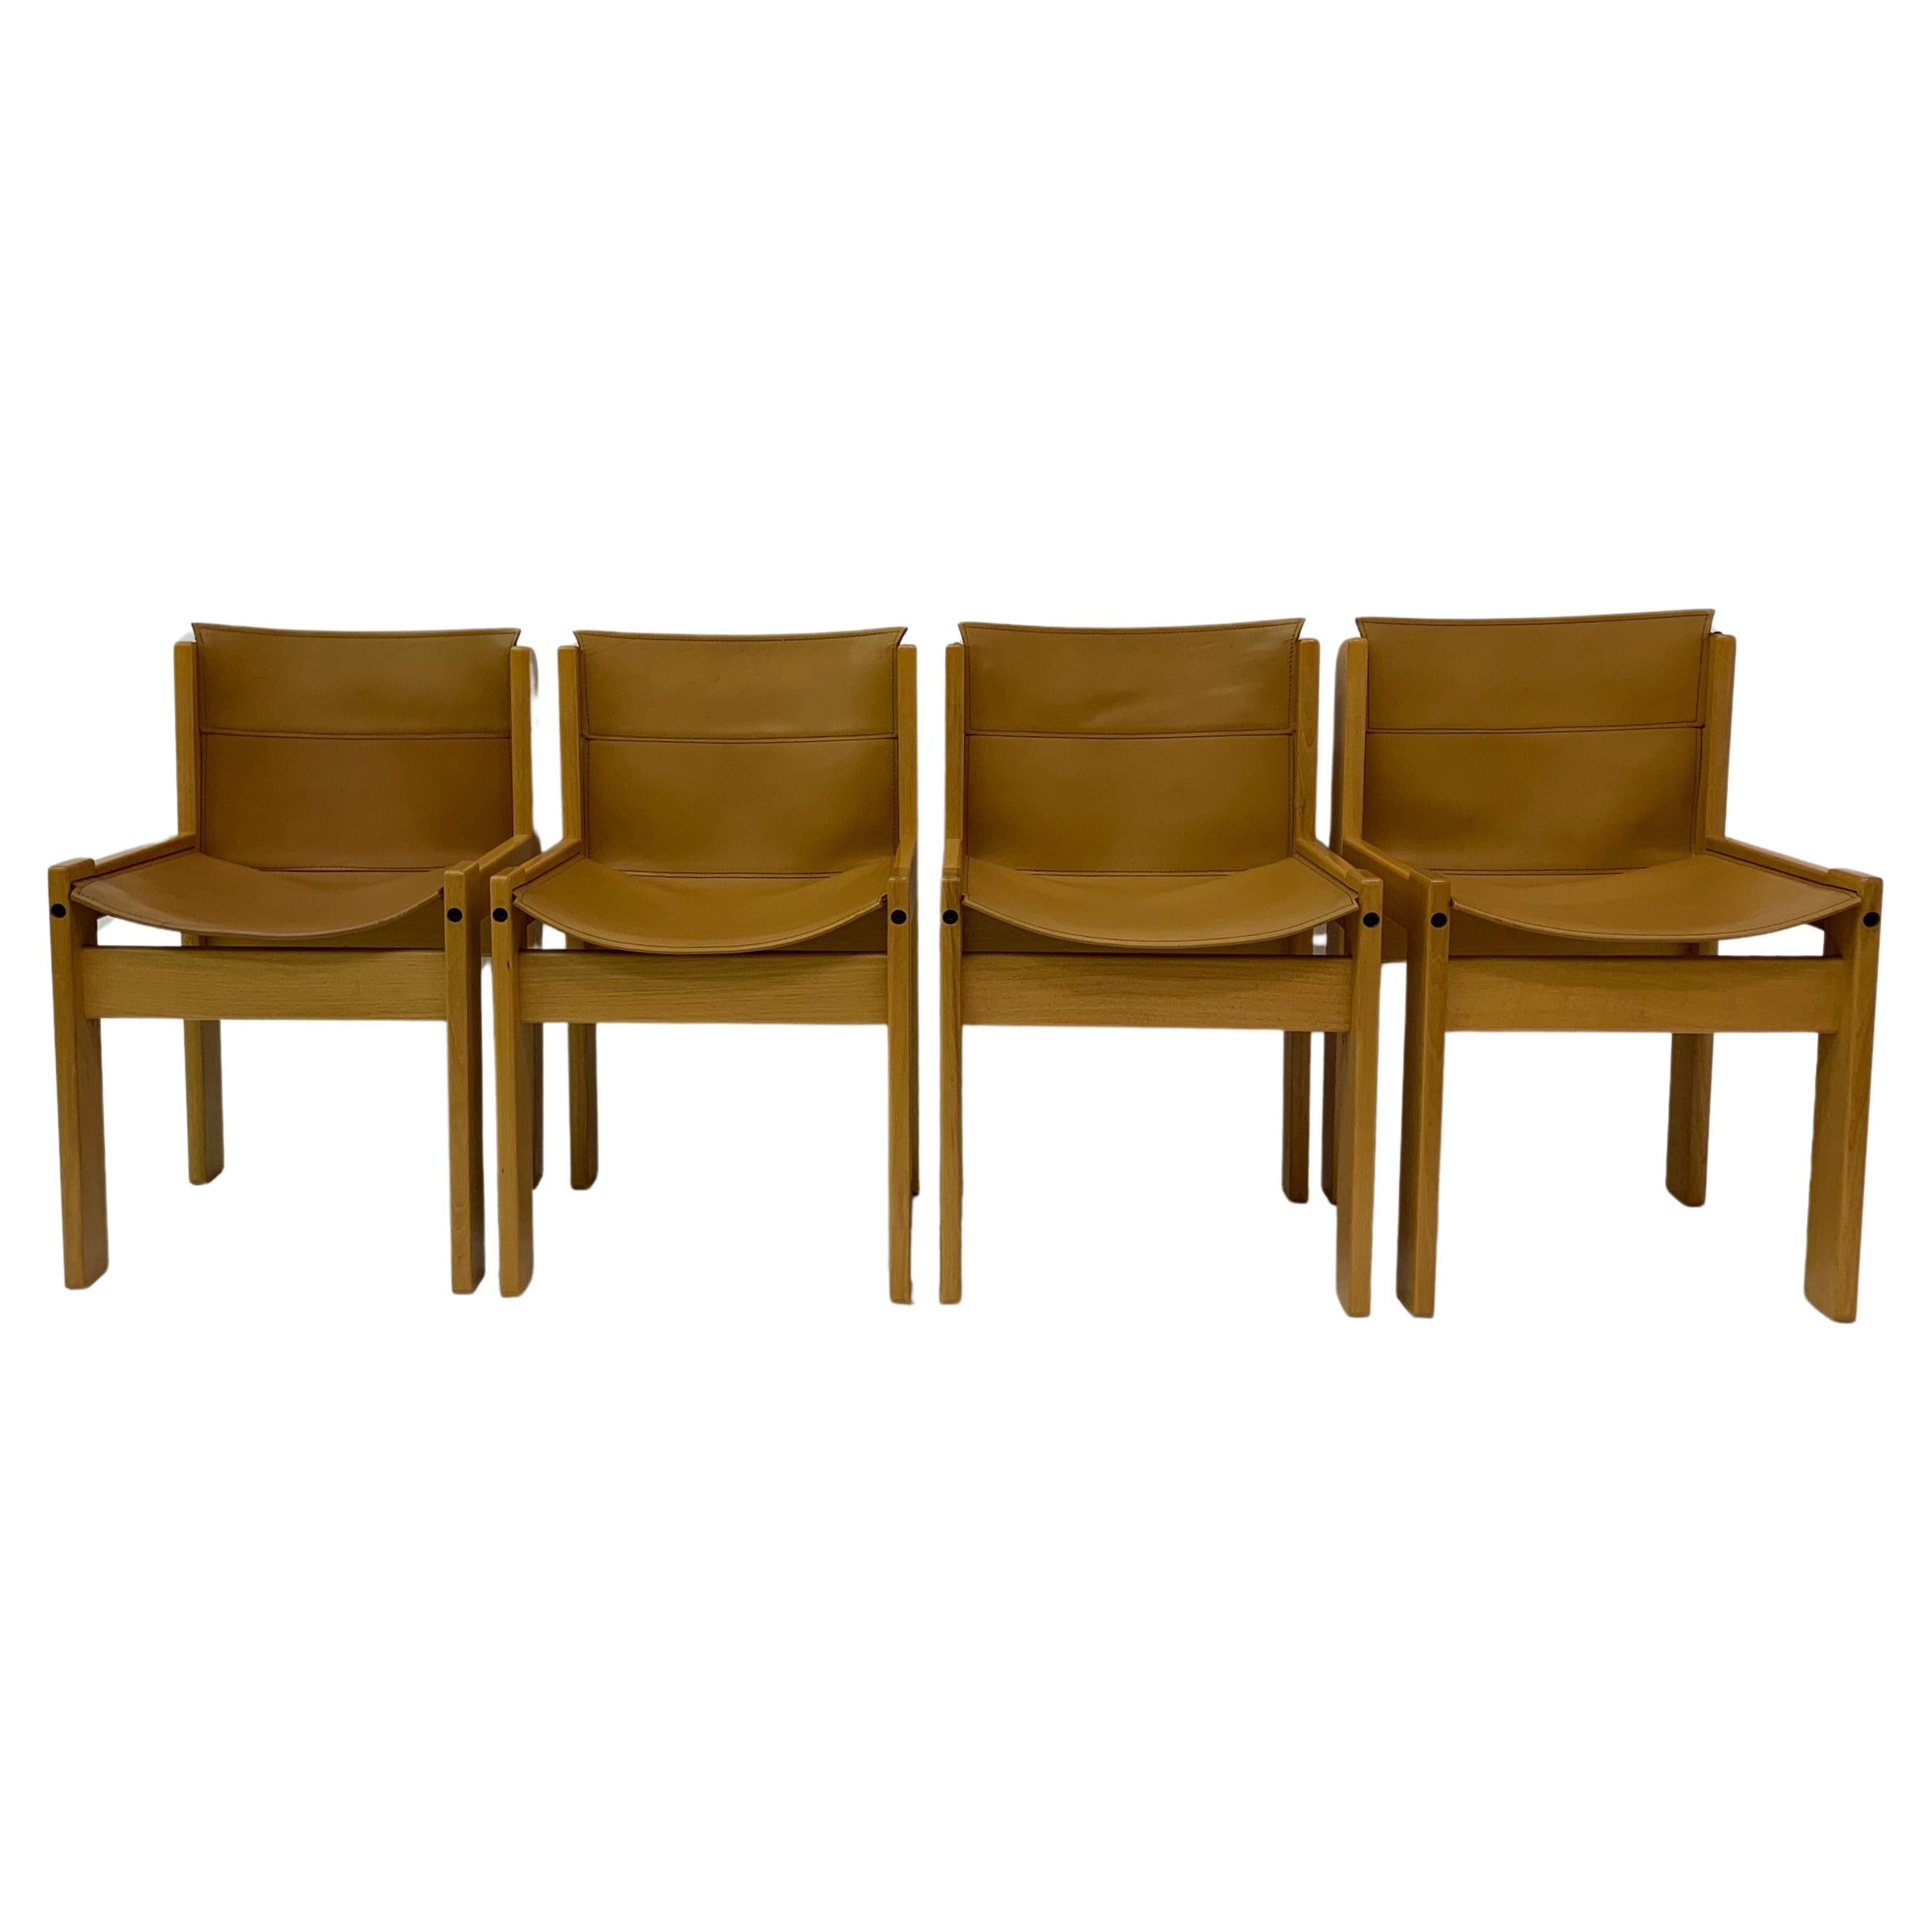 Set of 4 Vintage Italian Dining Chairs from Ibisco, 1970s